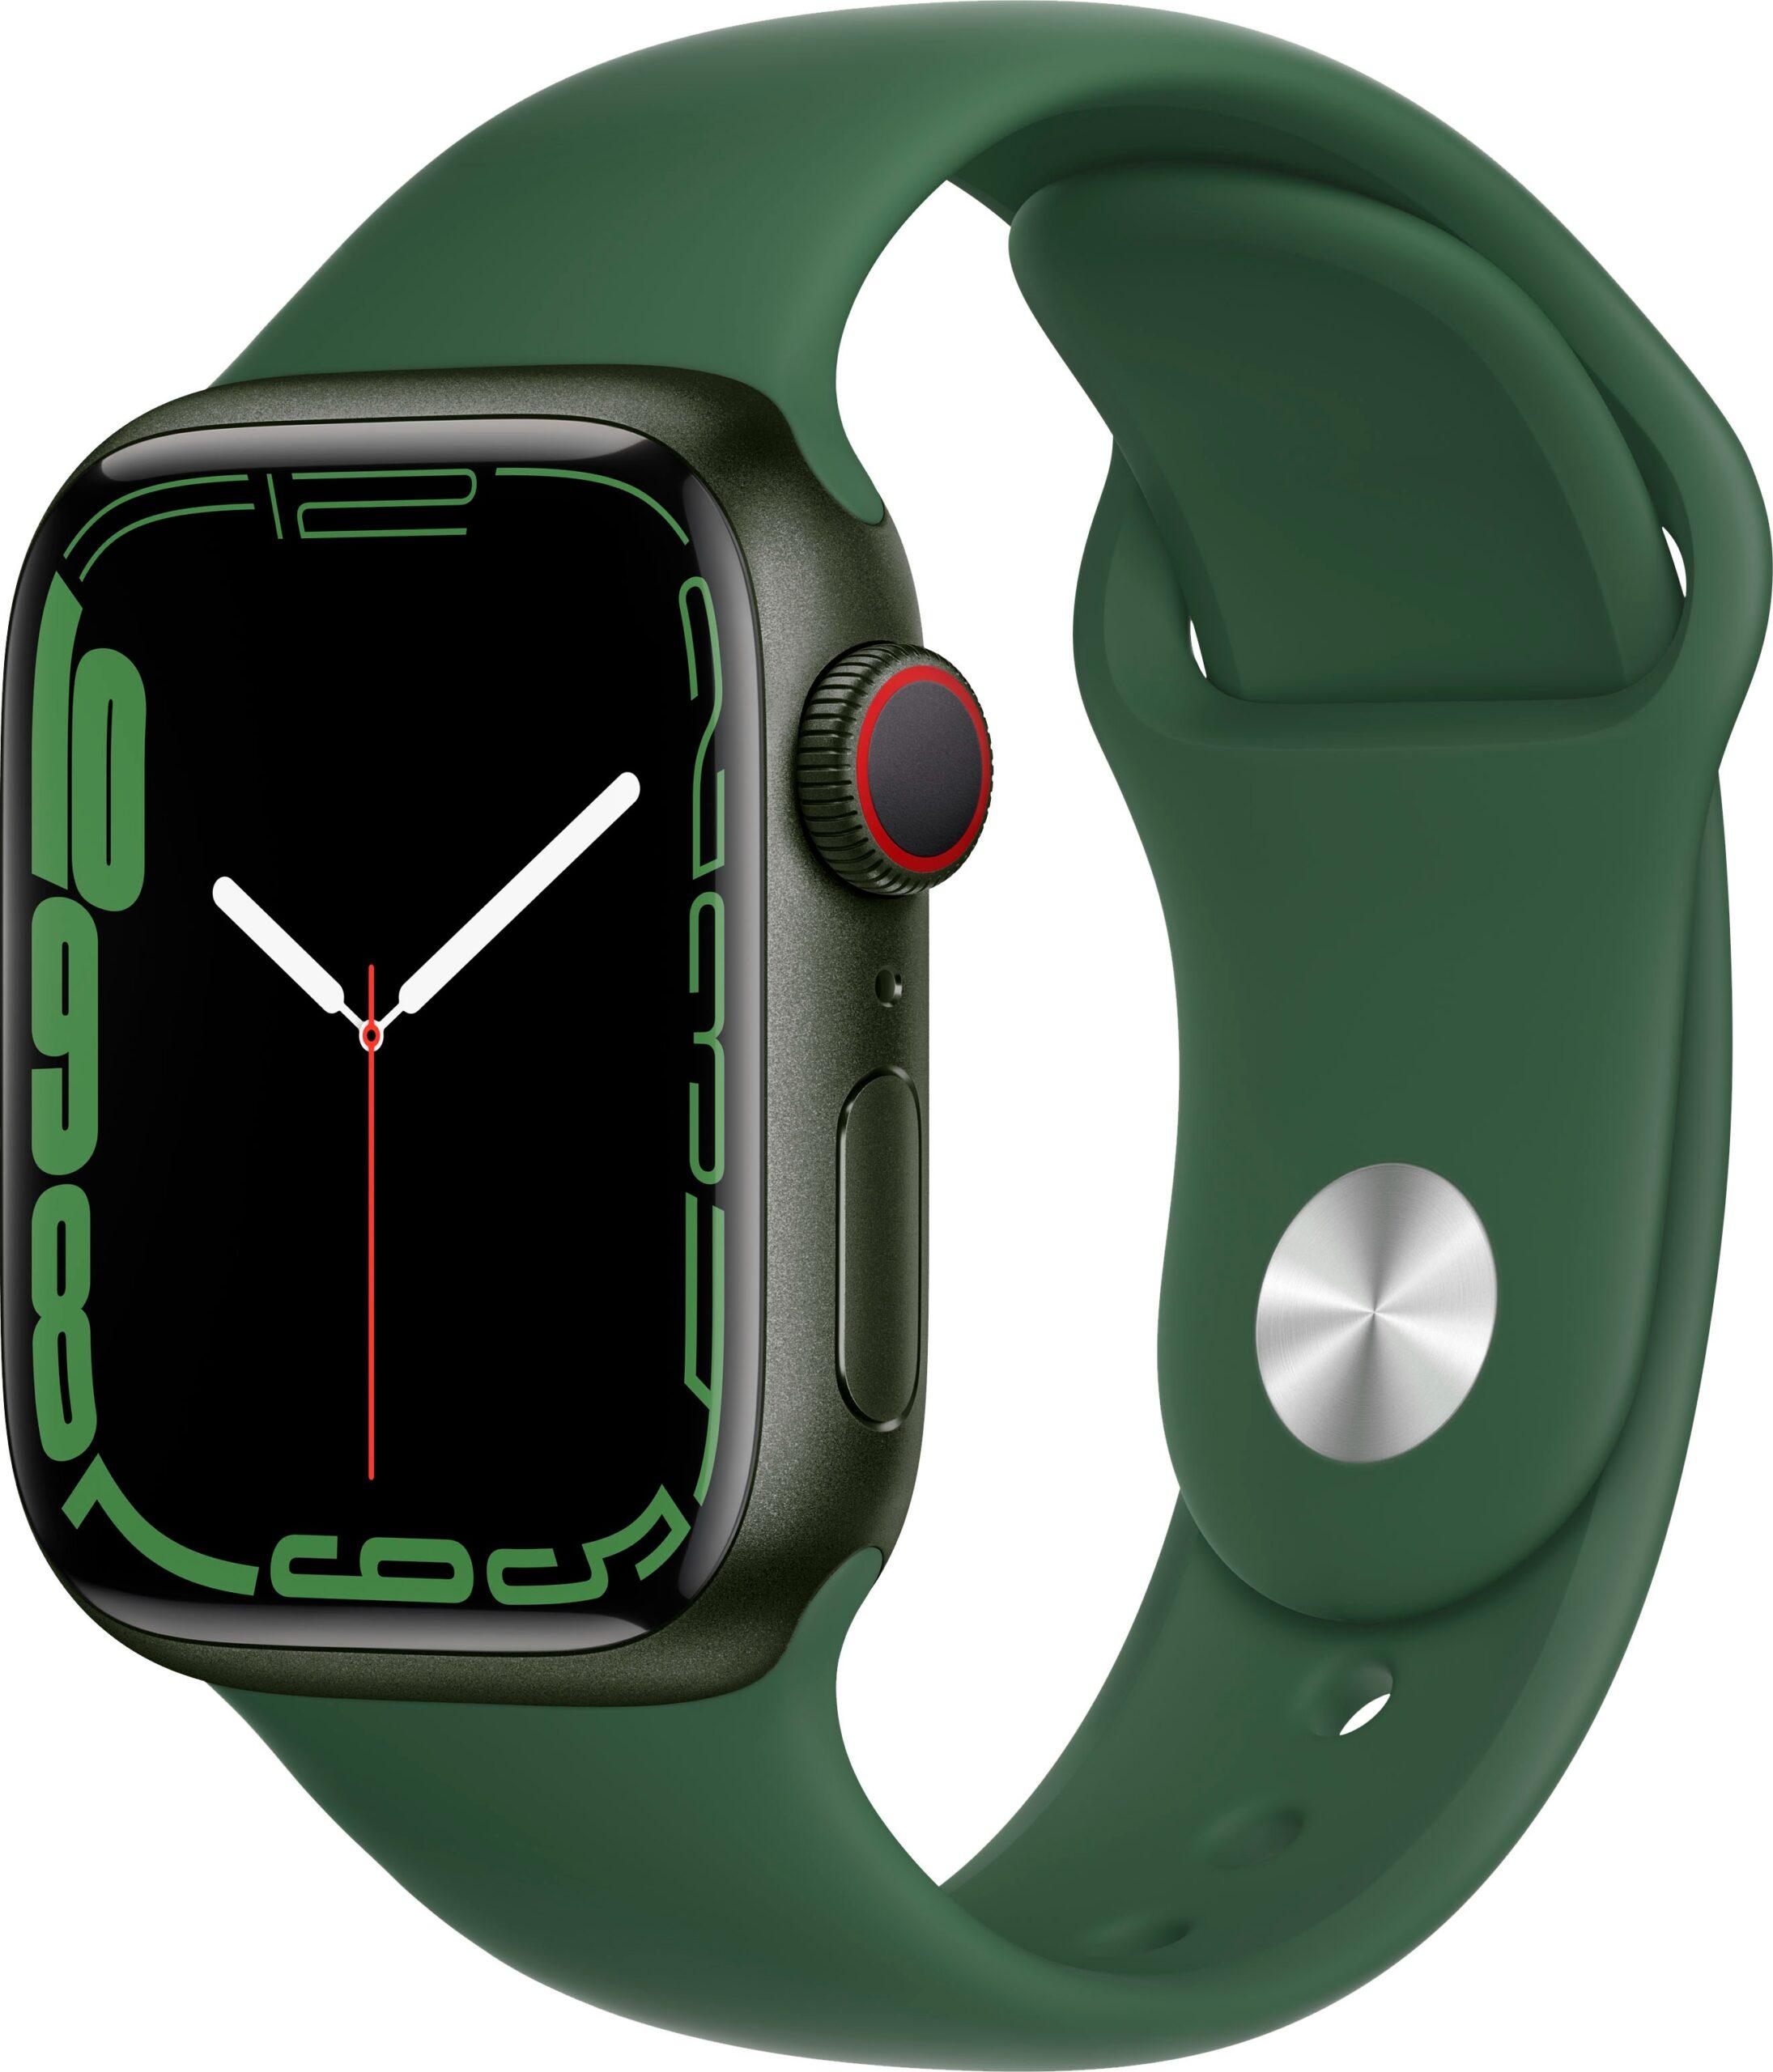 Apple Watch Series 7 is now $339! If you need an Apple Watch this holiday season, this is an incredible deal you should not pass up. It's selling fast on BestBuy, with a $160 discount off the regular $499 price.  9a9a33d9 6339741 sd scaled